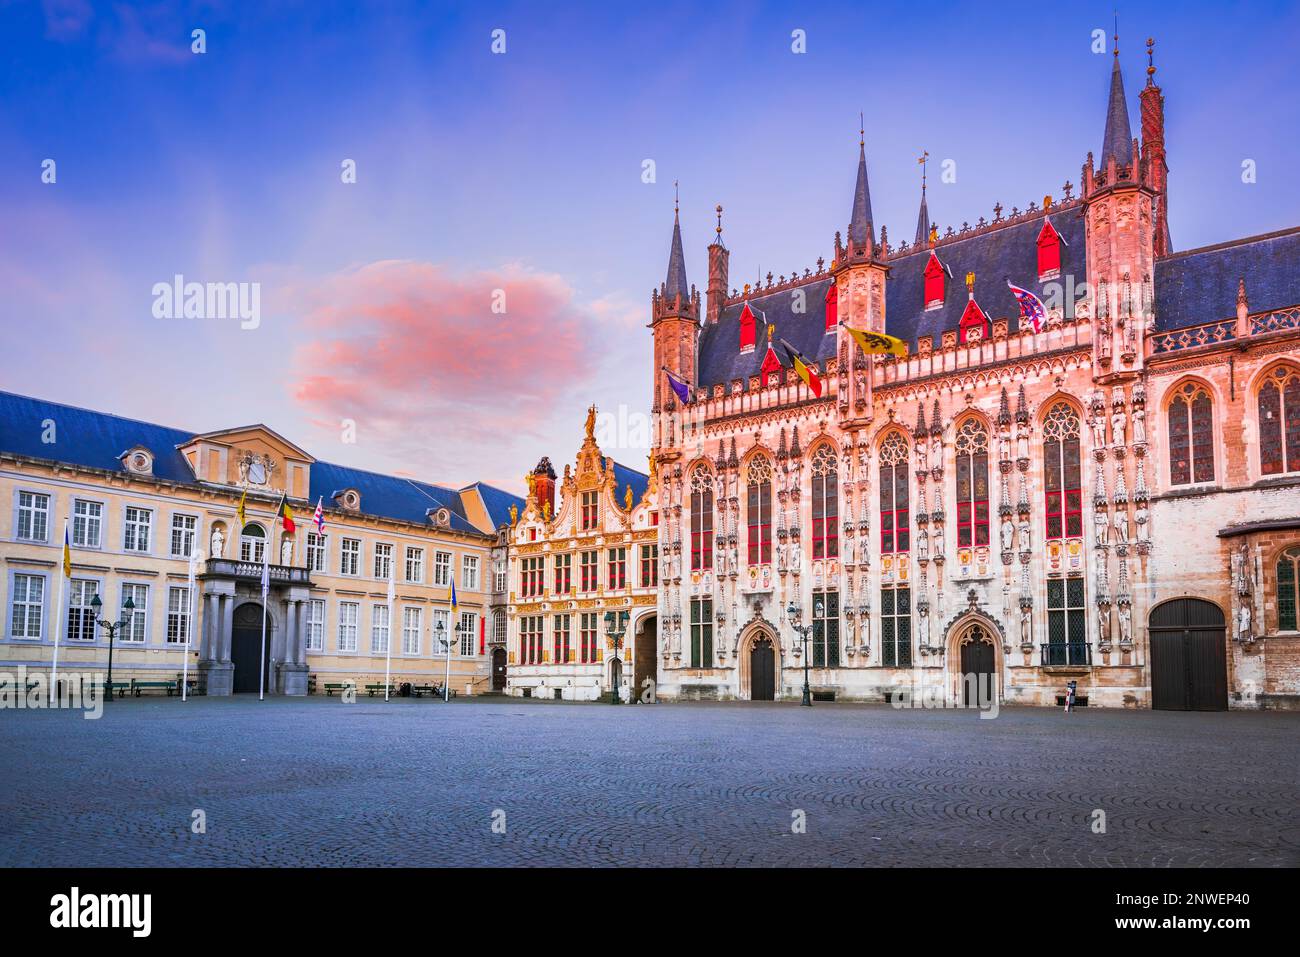 Burg Square is the historic heart of Bruges, Belgium, with picturesque Gothic and Renaissance buildings, including the stunning Stadhuis beautifully l Stock Photo